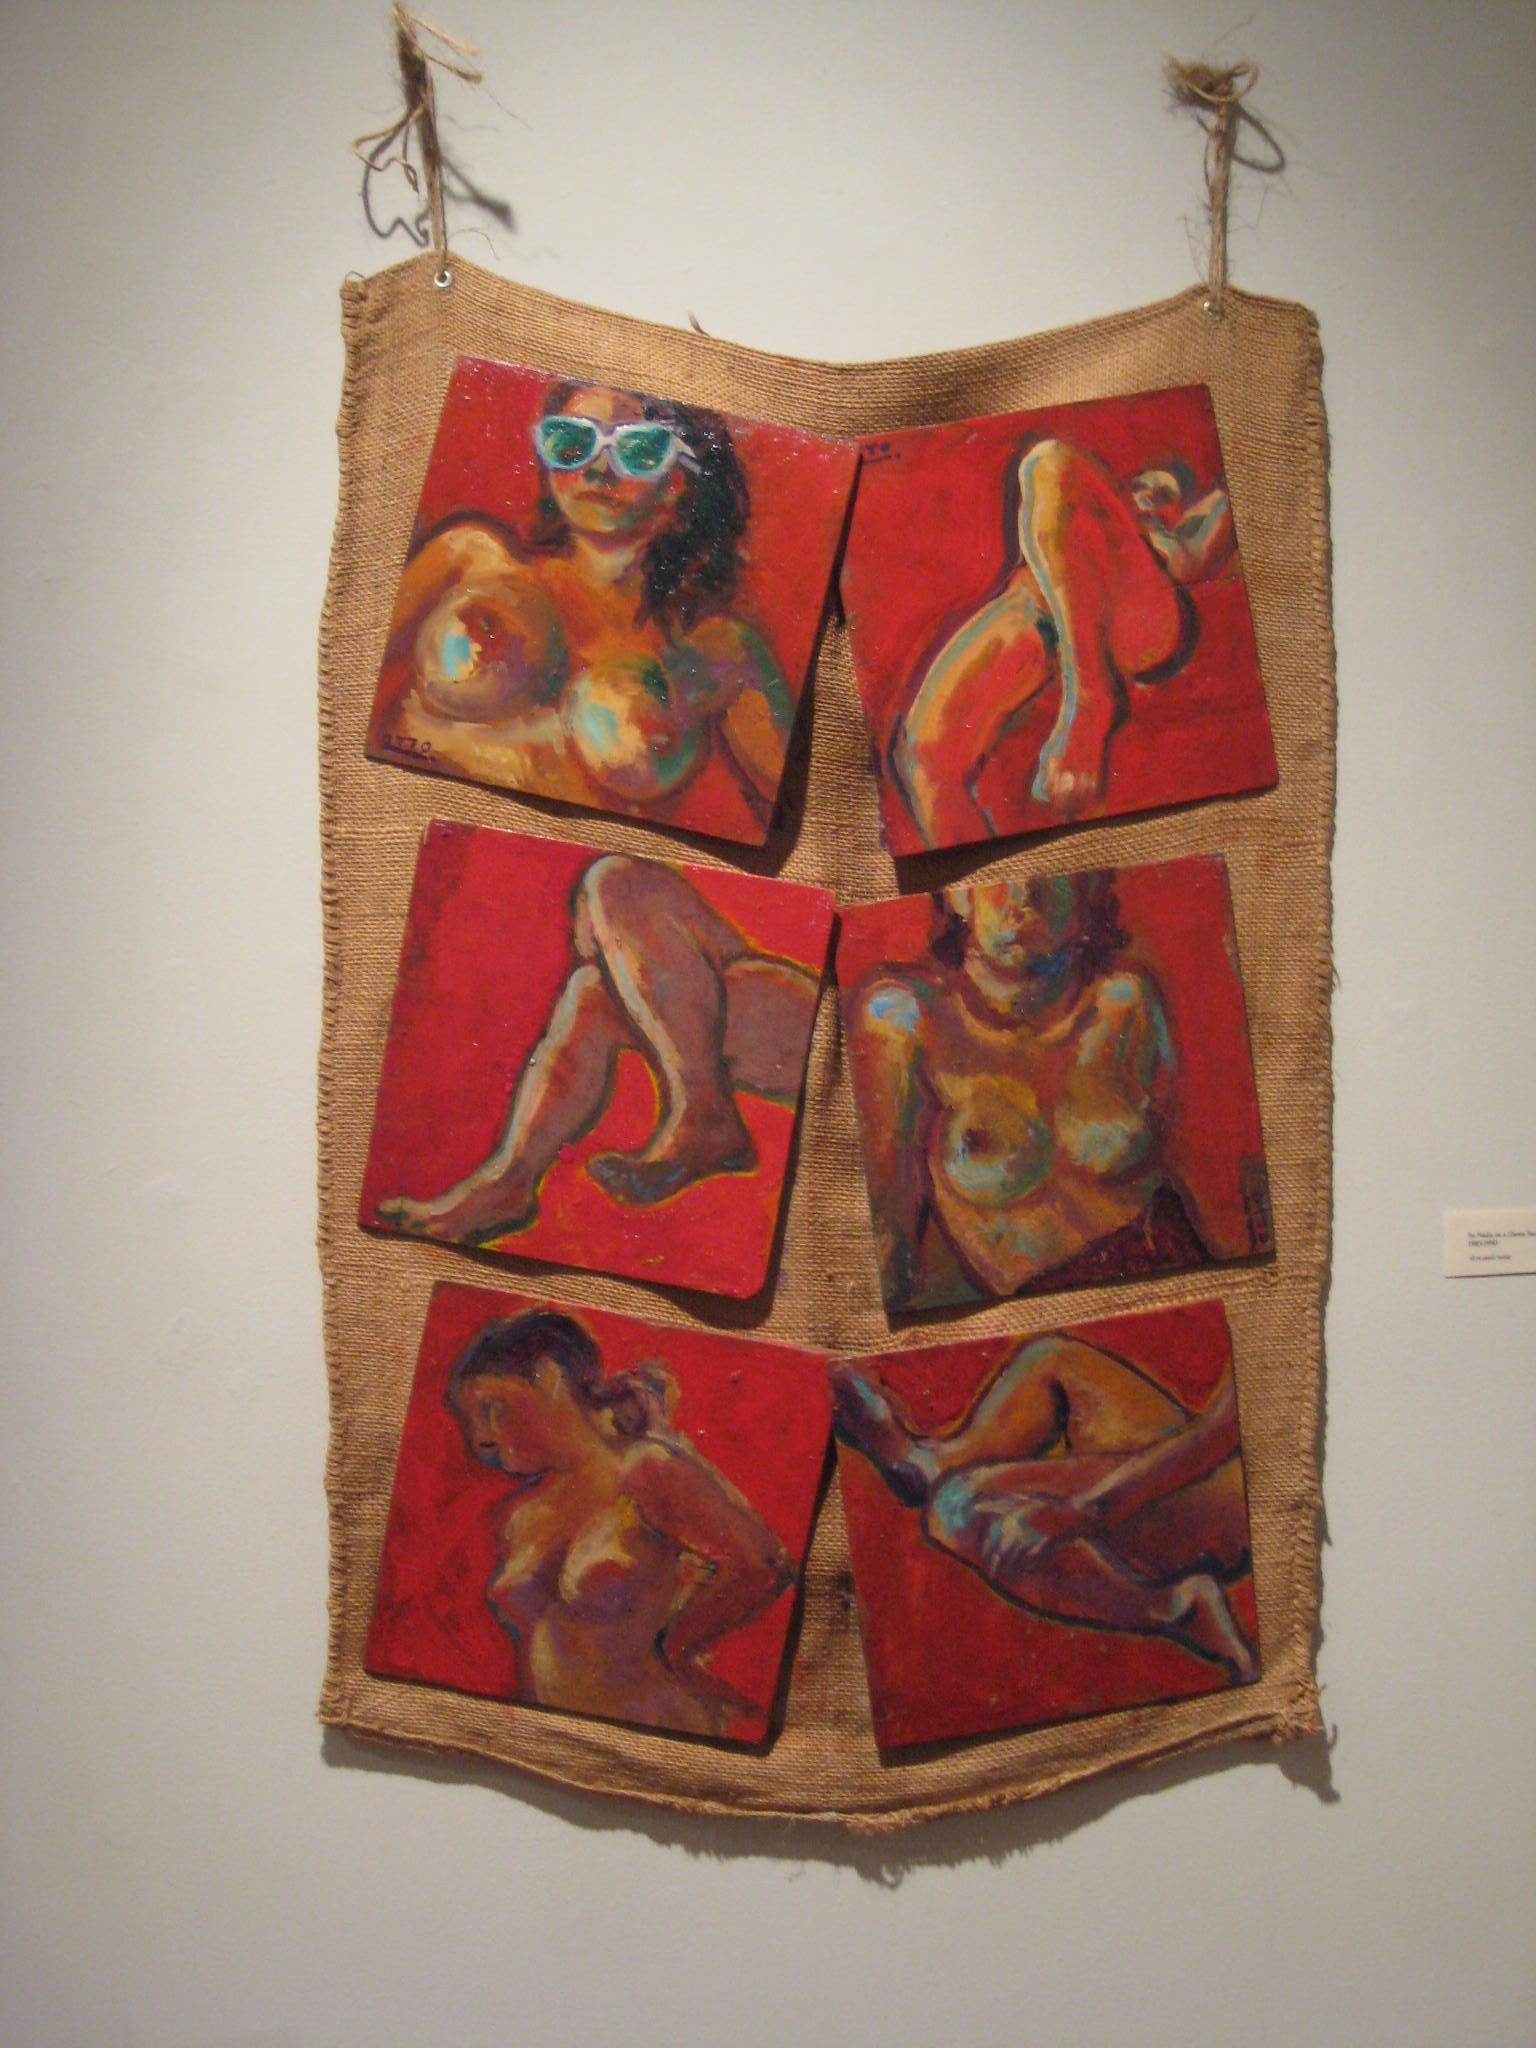 Six Nudes on a Gunny Sack - PAINTING BY CURTIS OTTO; PHOTO BY BOB DORAN